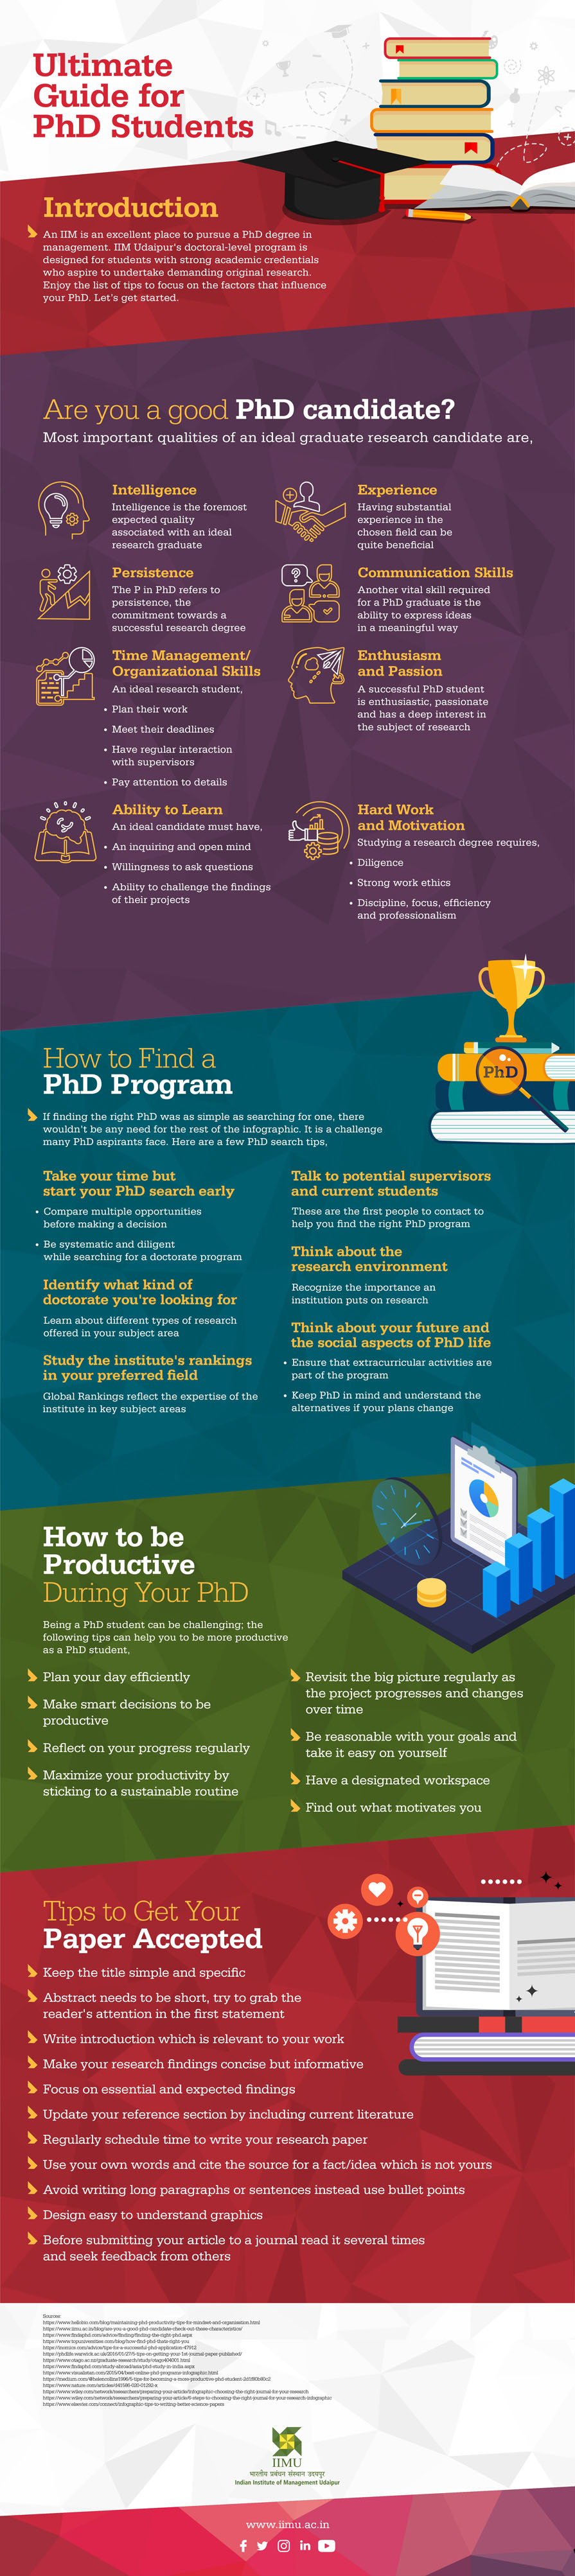 phd student guide